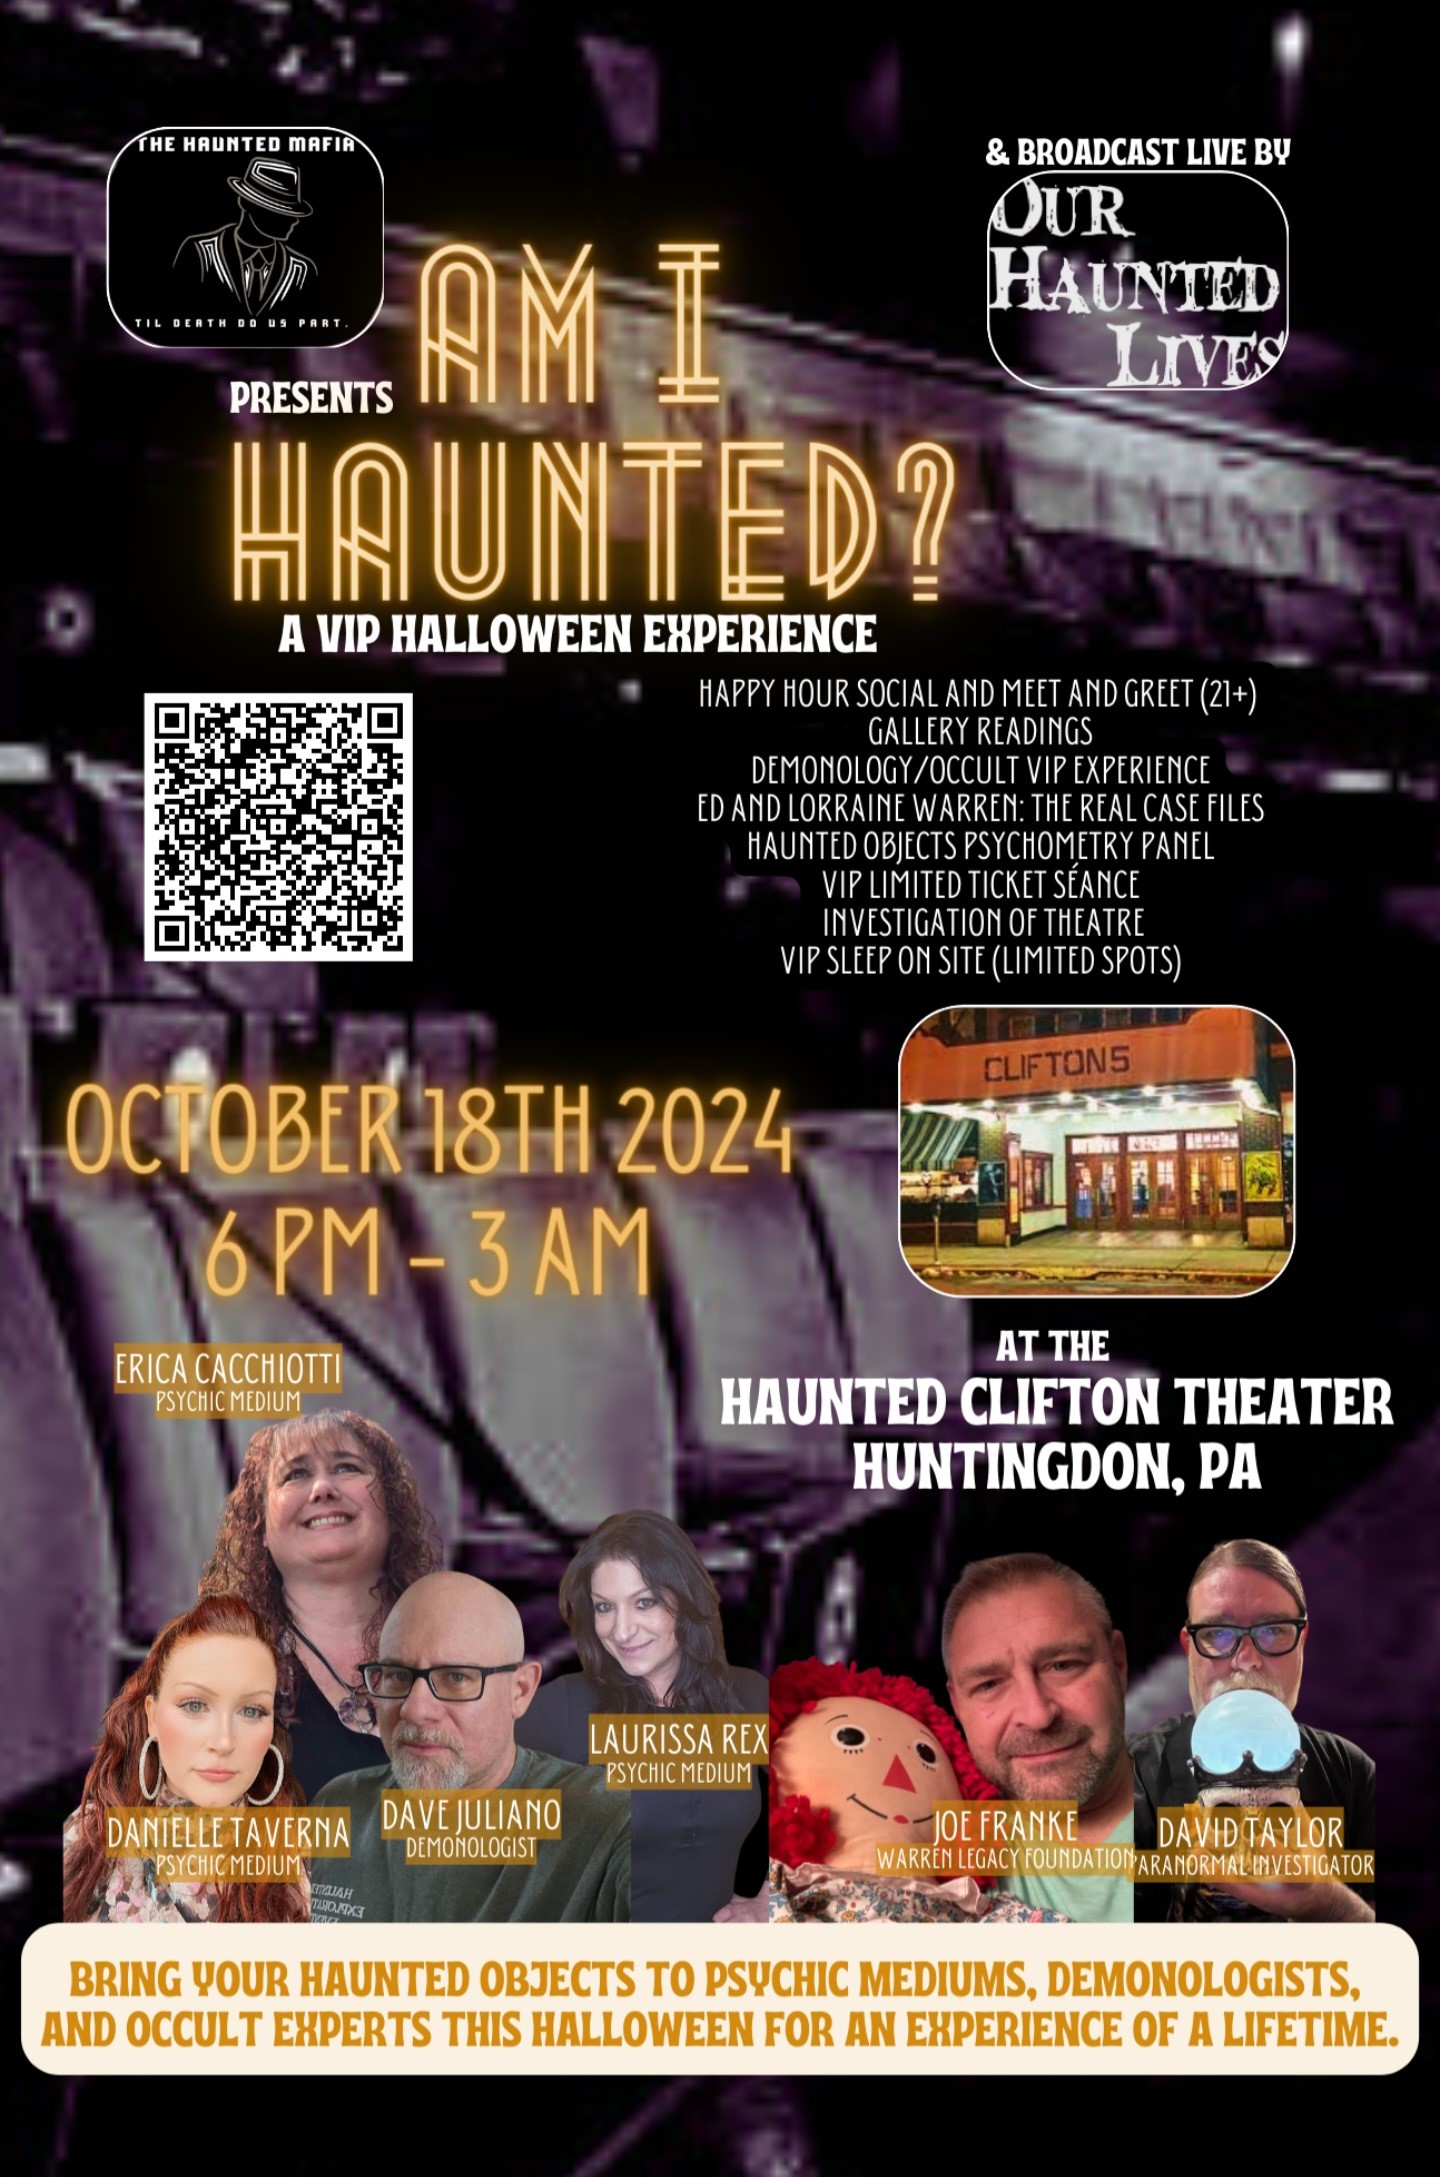 Am I Haunted? A VIP Halloween Experience at The Haunted Clifton Theater  on Oct 18, 18:00@The Haunted Clifton Theater - Buy tickets and Get information on Third Eye Event Productions, L 